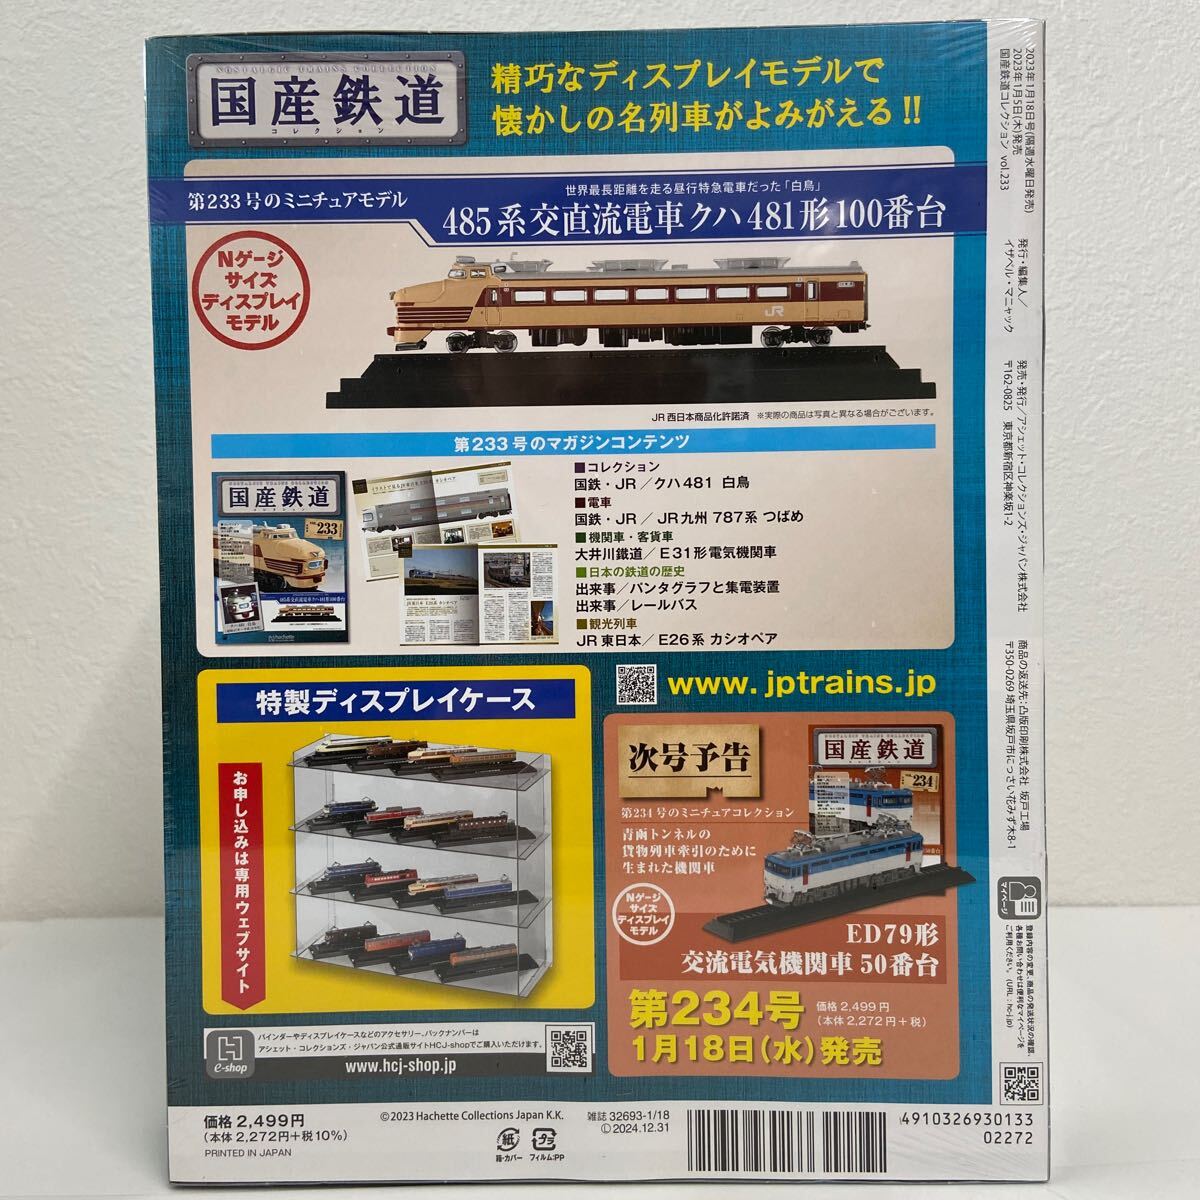 asheto domestic production railroad collection #233 485 series . direct current train k is 481 shape 100 number pcs swan N gauge size display model miniature model 